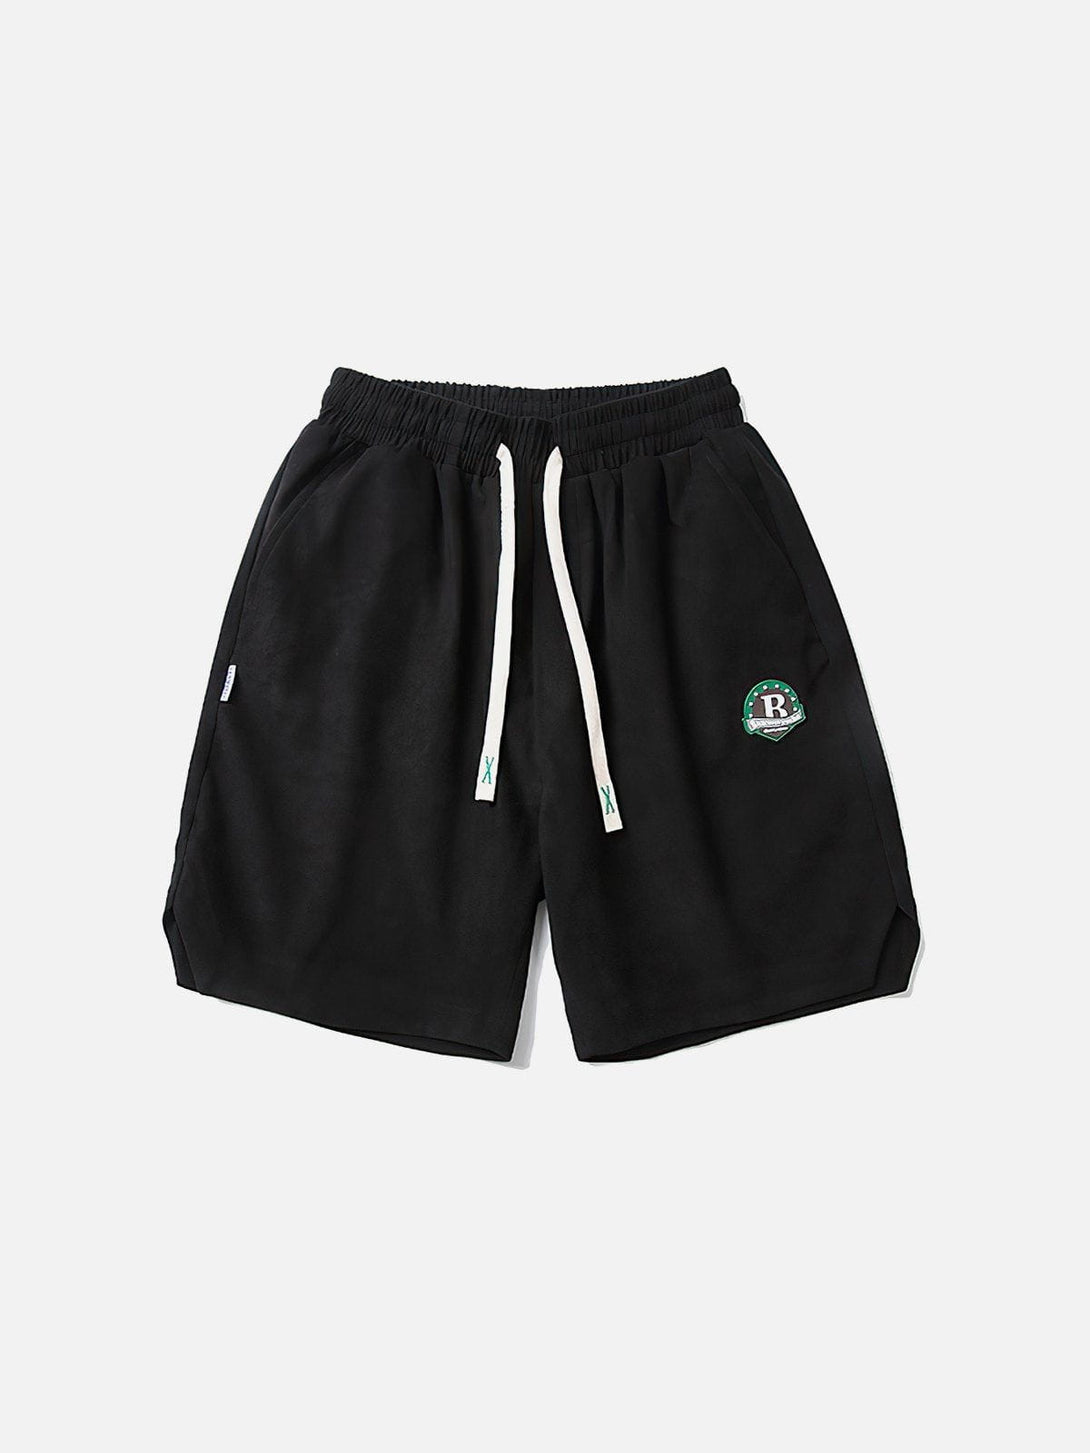 Levefly - Solid Embroidery Badge Drawstring Shorts - Streetwear Fashion - levefly.com